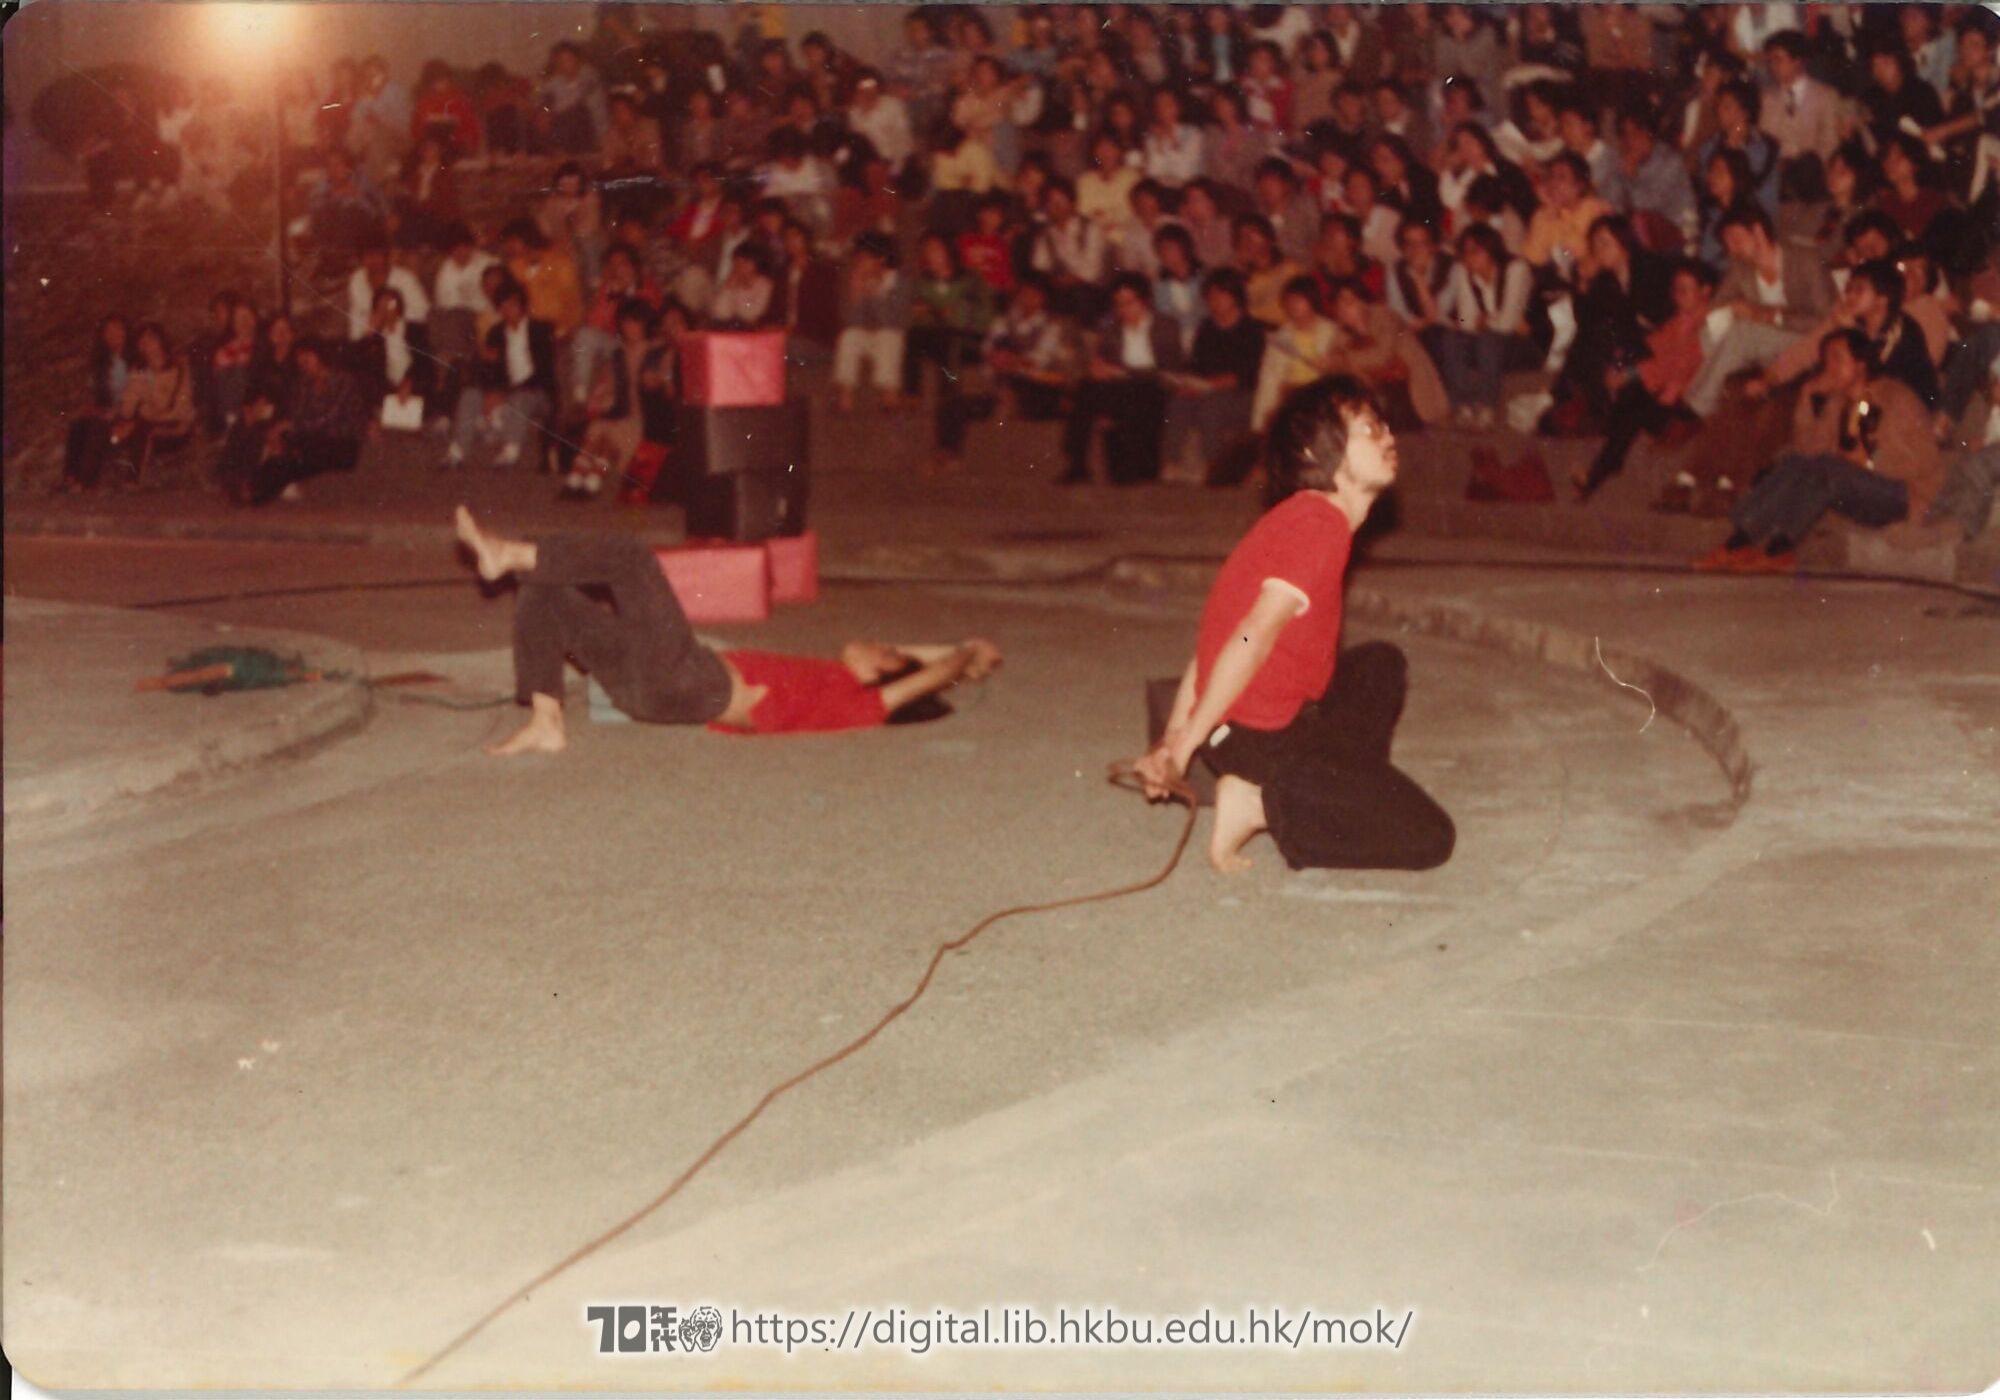   1984/1997 performance in CUHK  